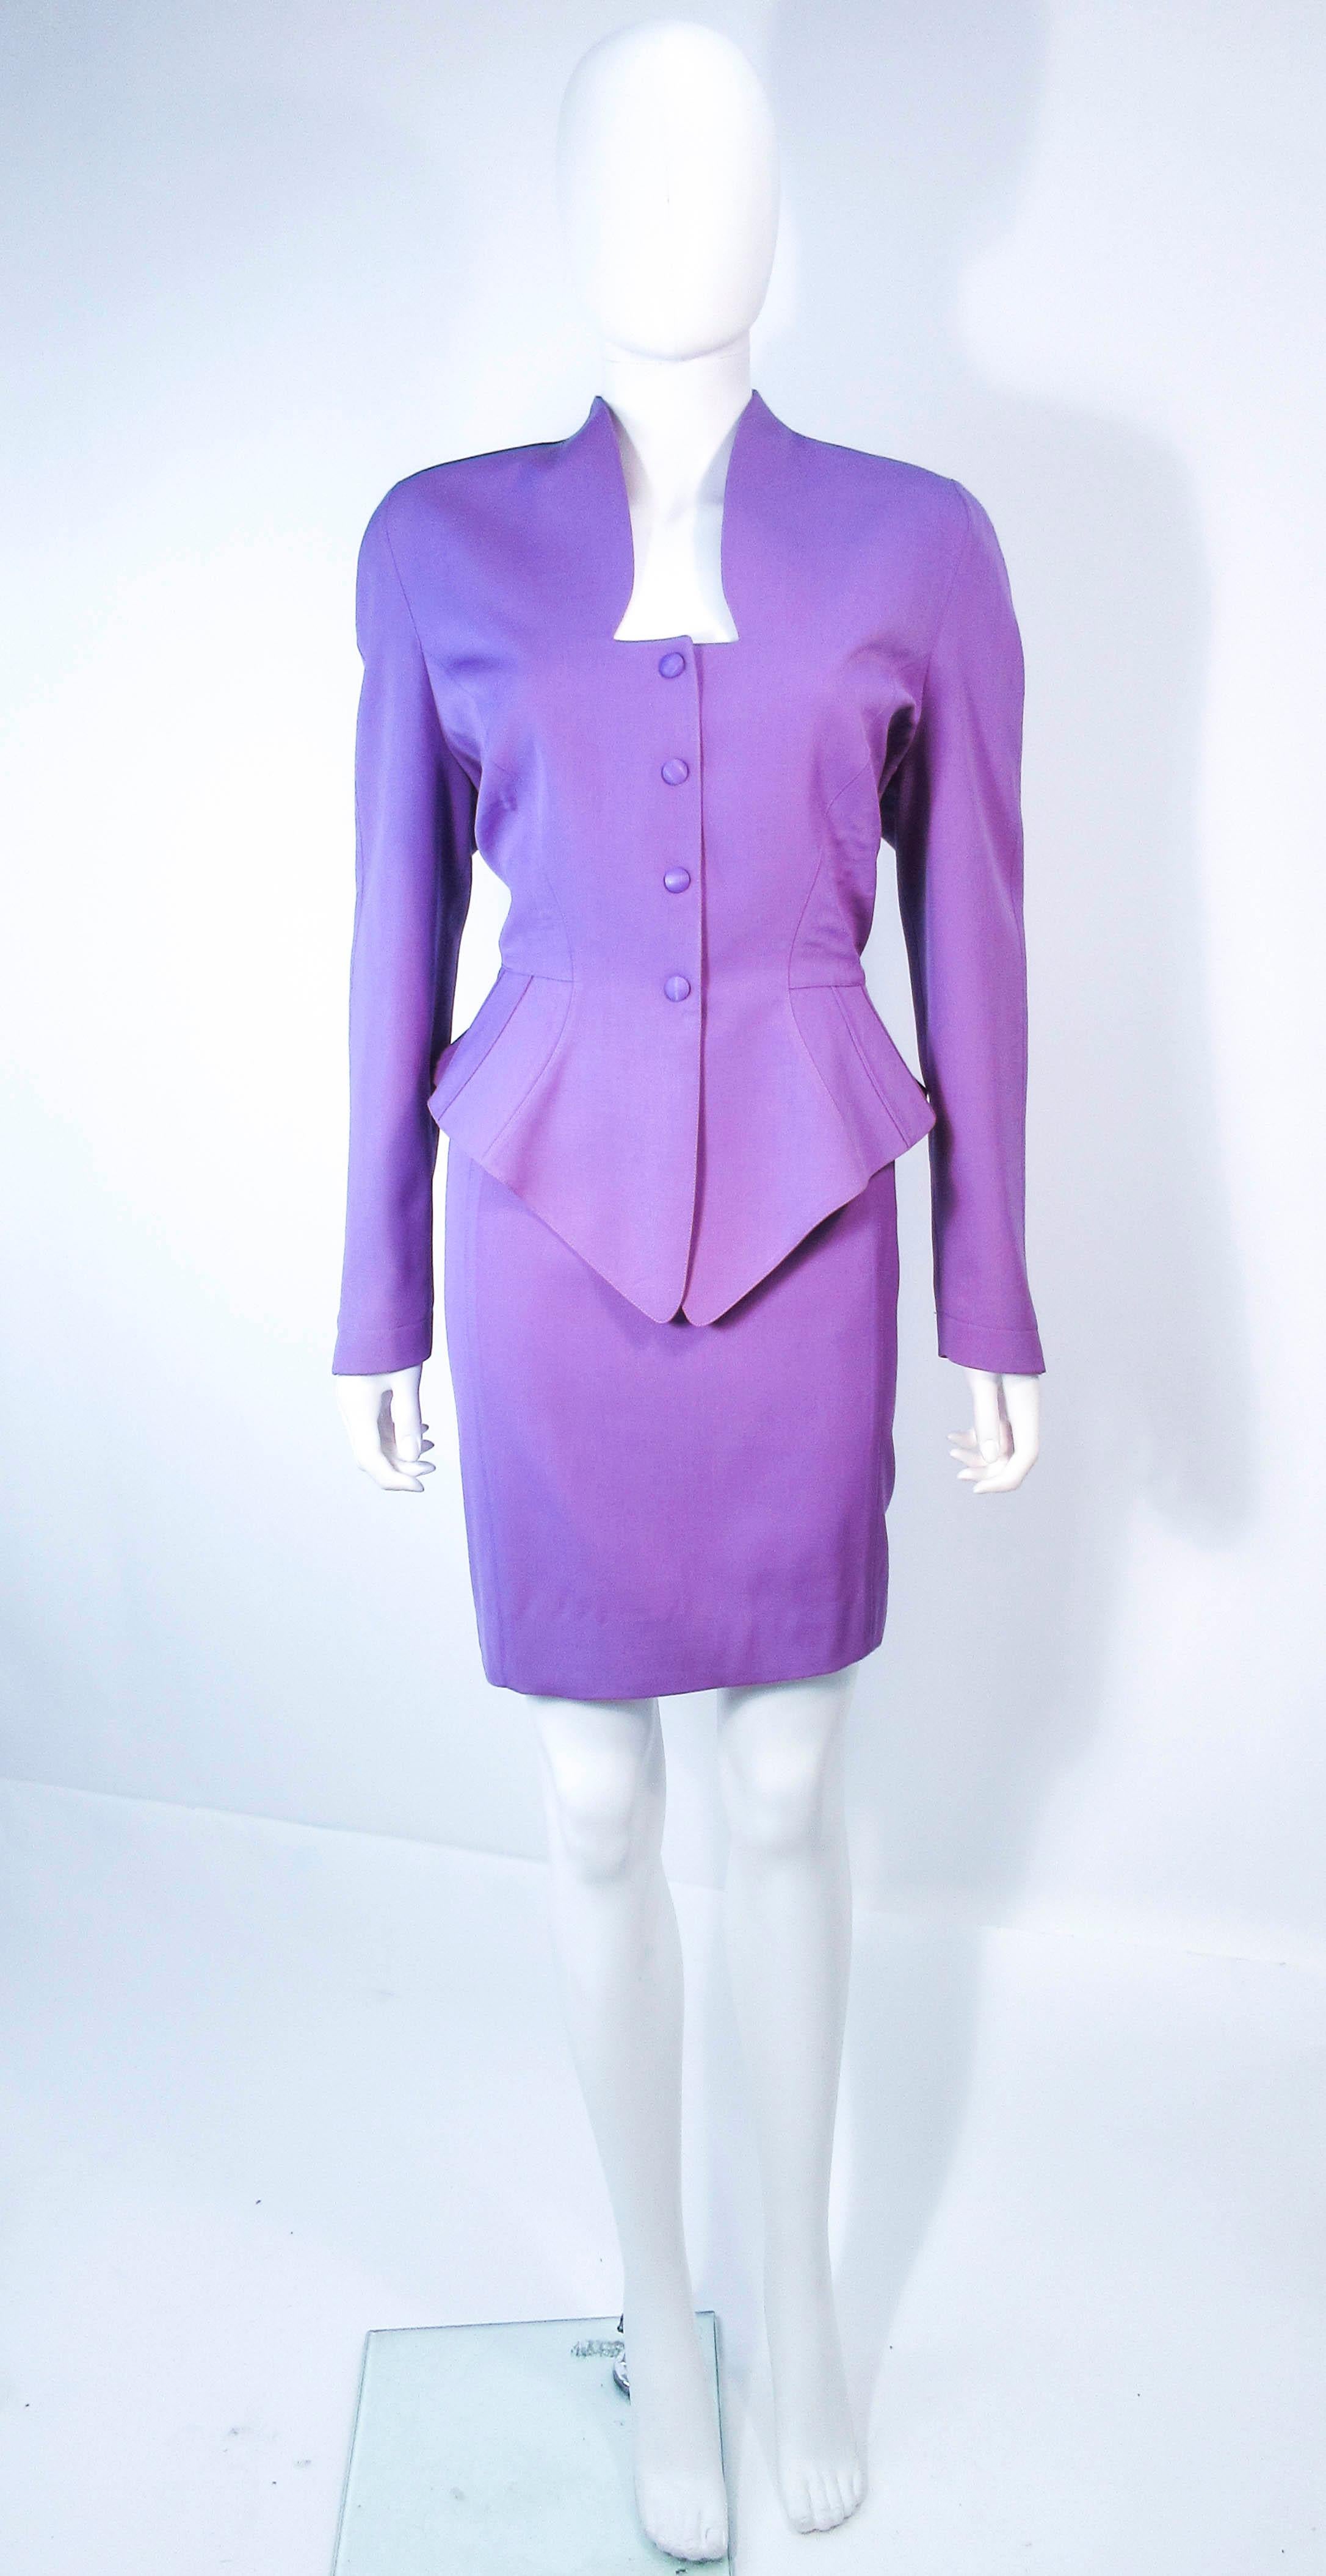  This Theirry Mugler skirt suit is composed of a lavender/purple hue wool. The jacket features a peplum design with snap front closures. The classic pencil style skirt features a zipper closure and appears to have been previously altered. 
 Made in